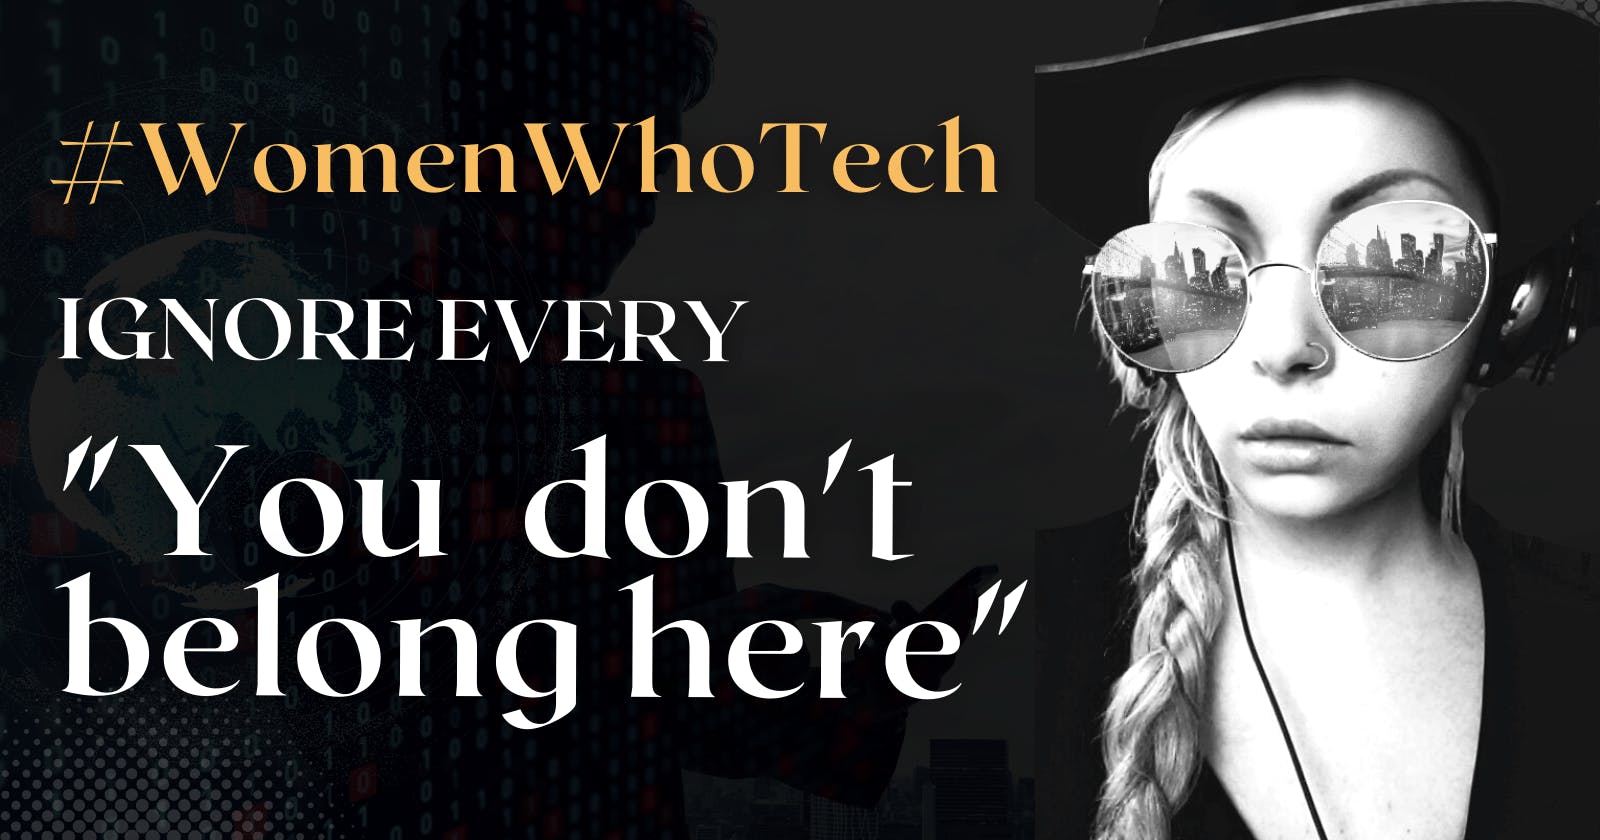 I was told, I don't belong into tech, but I did it anyway #WomenWhoTech